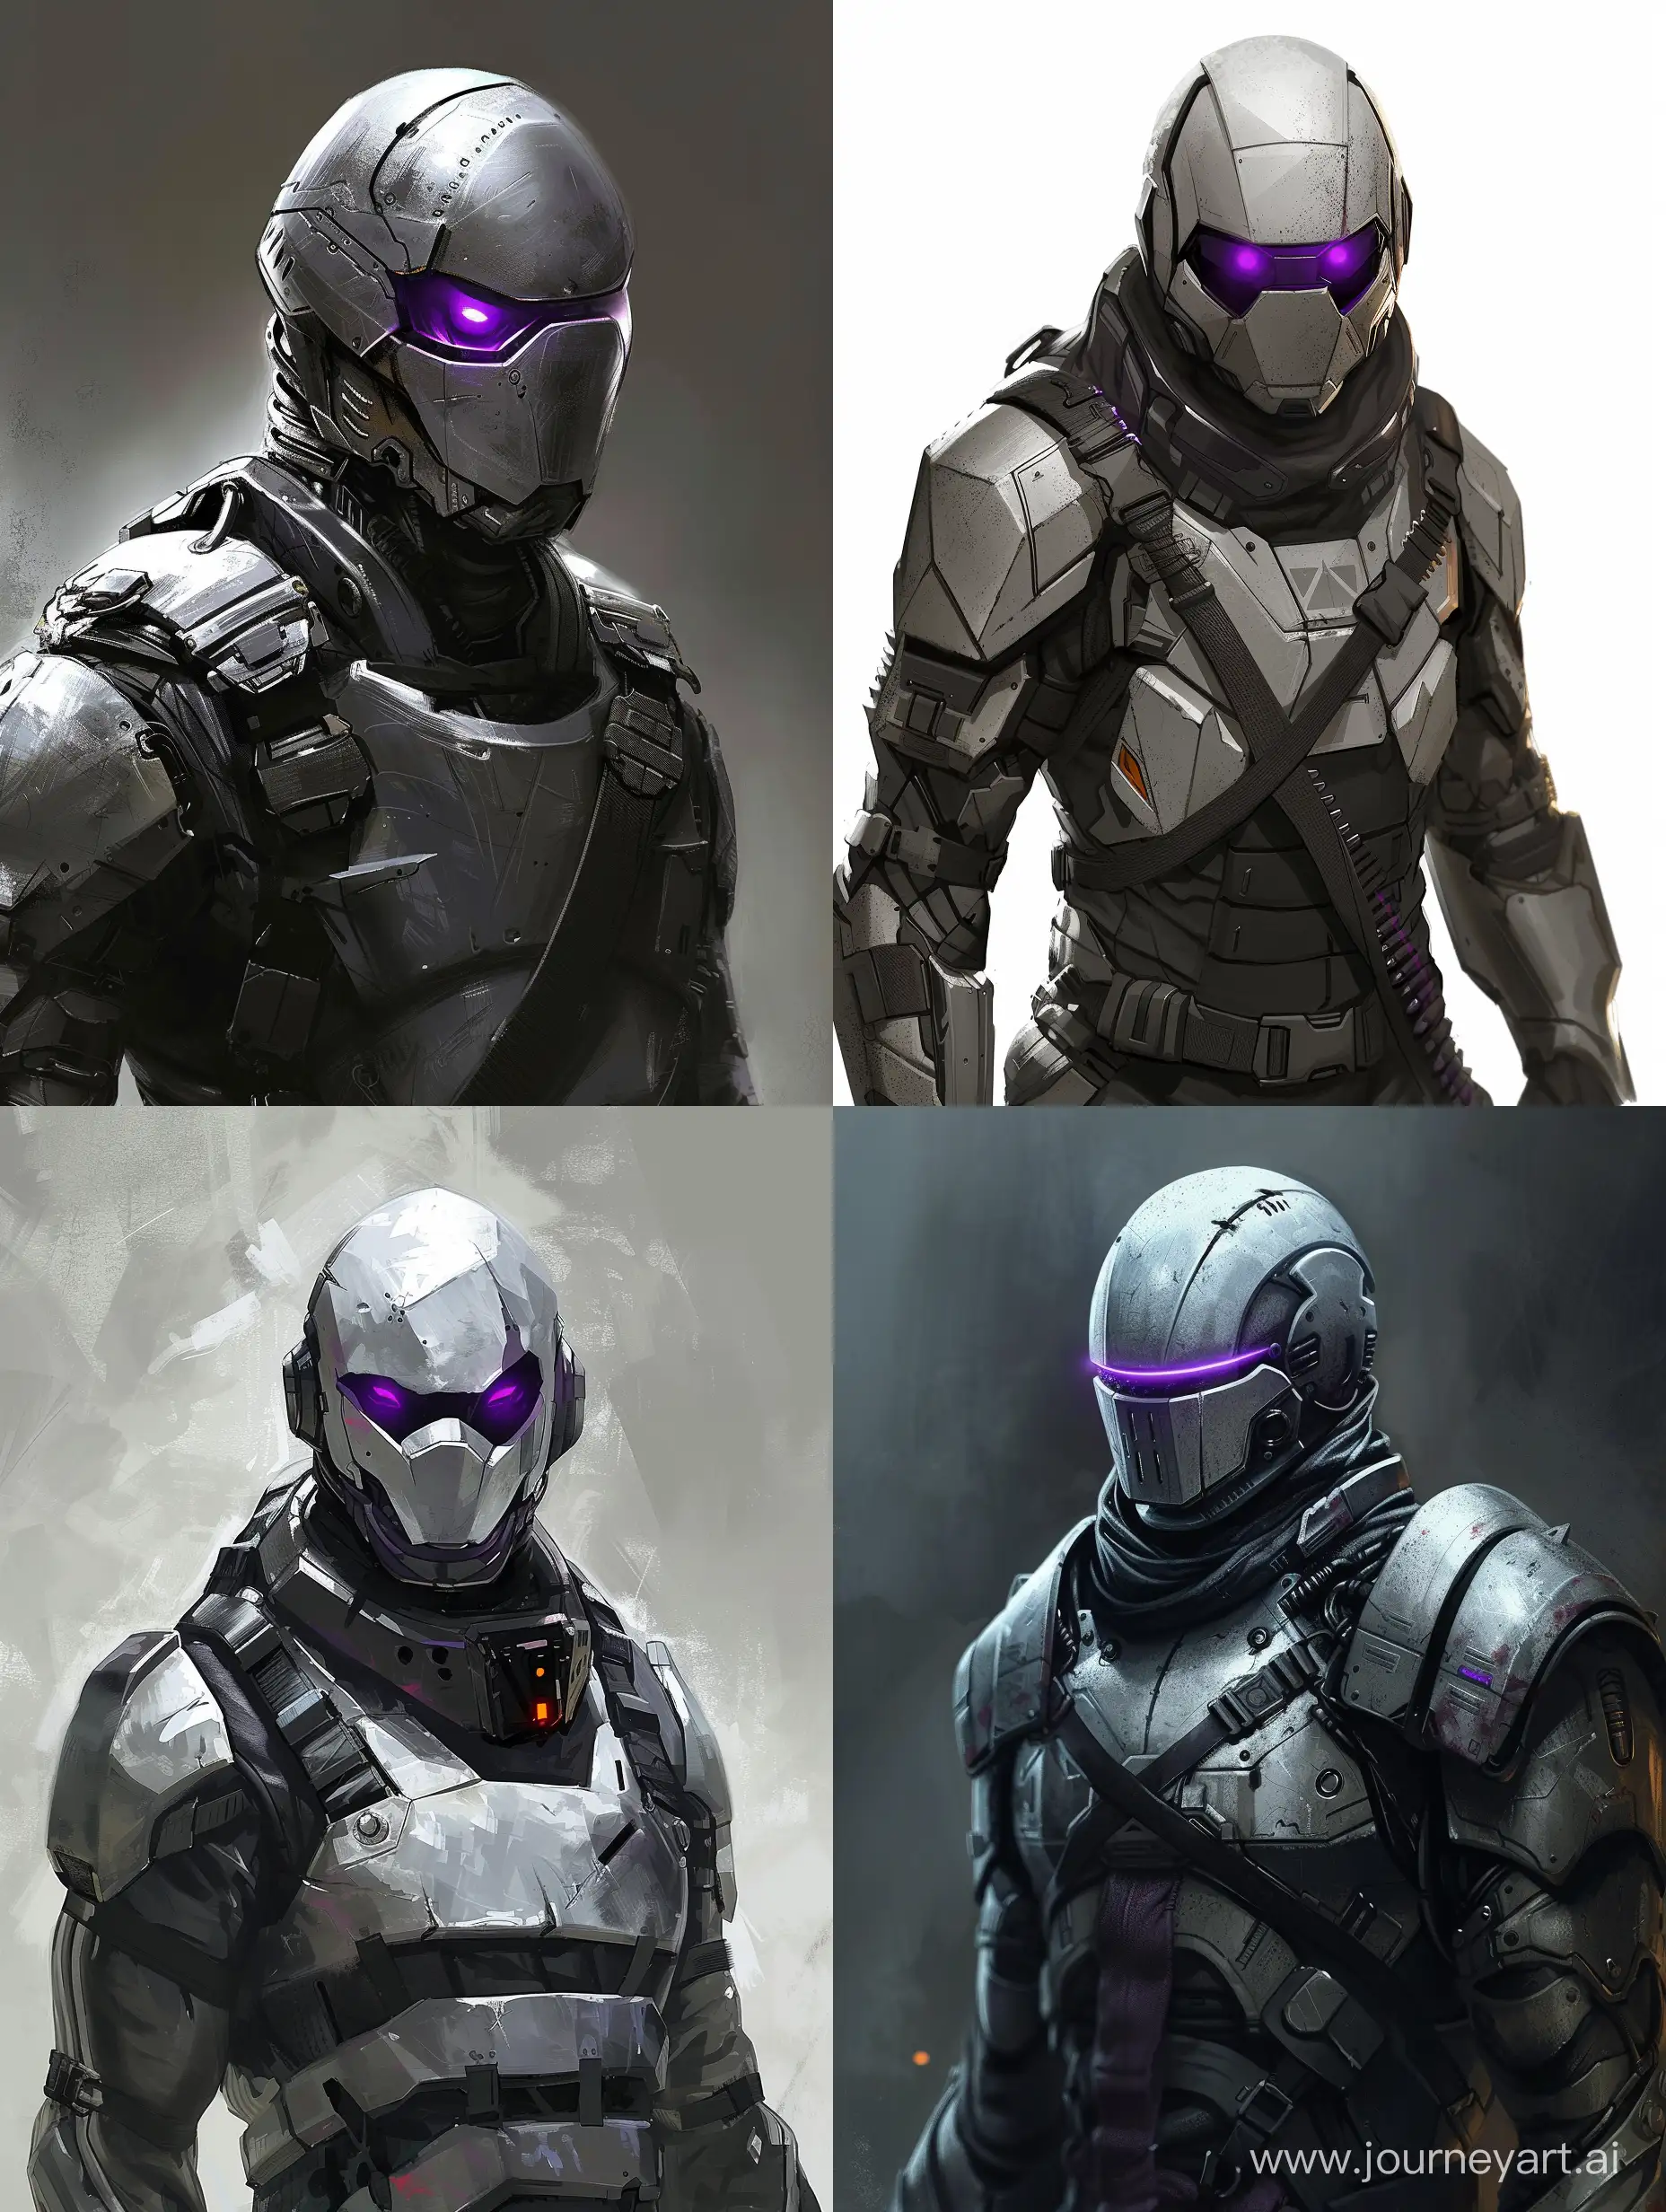 Epic-Fantasy-Character-with-Shredder-Armor-and-Silver-Tactical-Suit